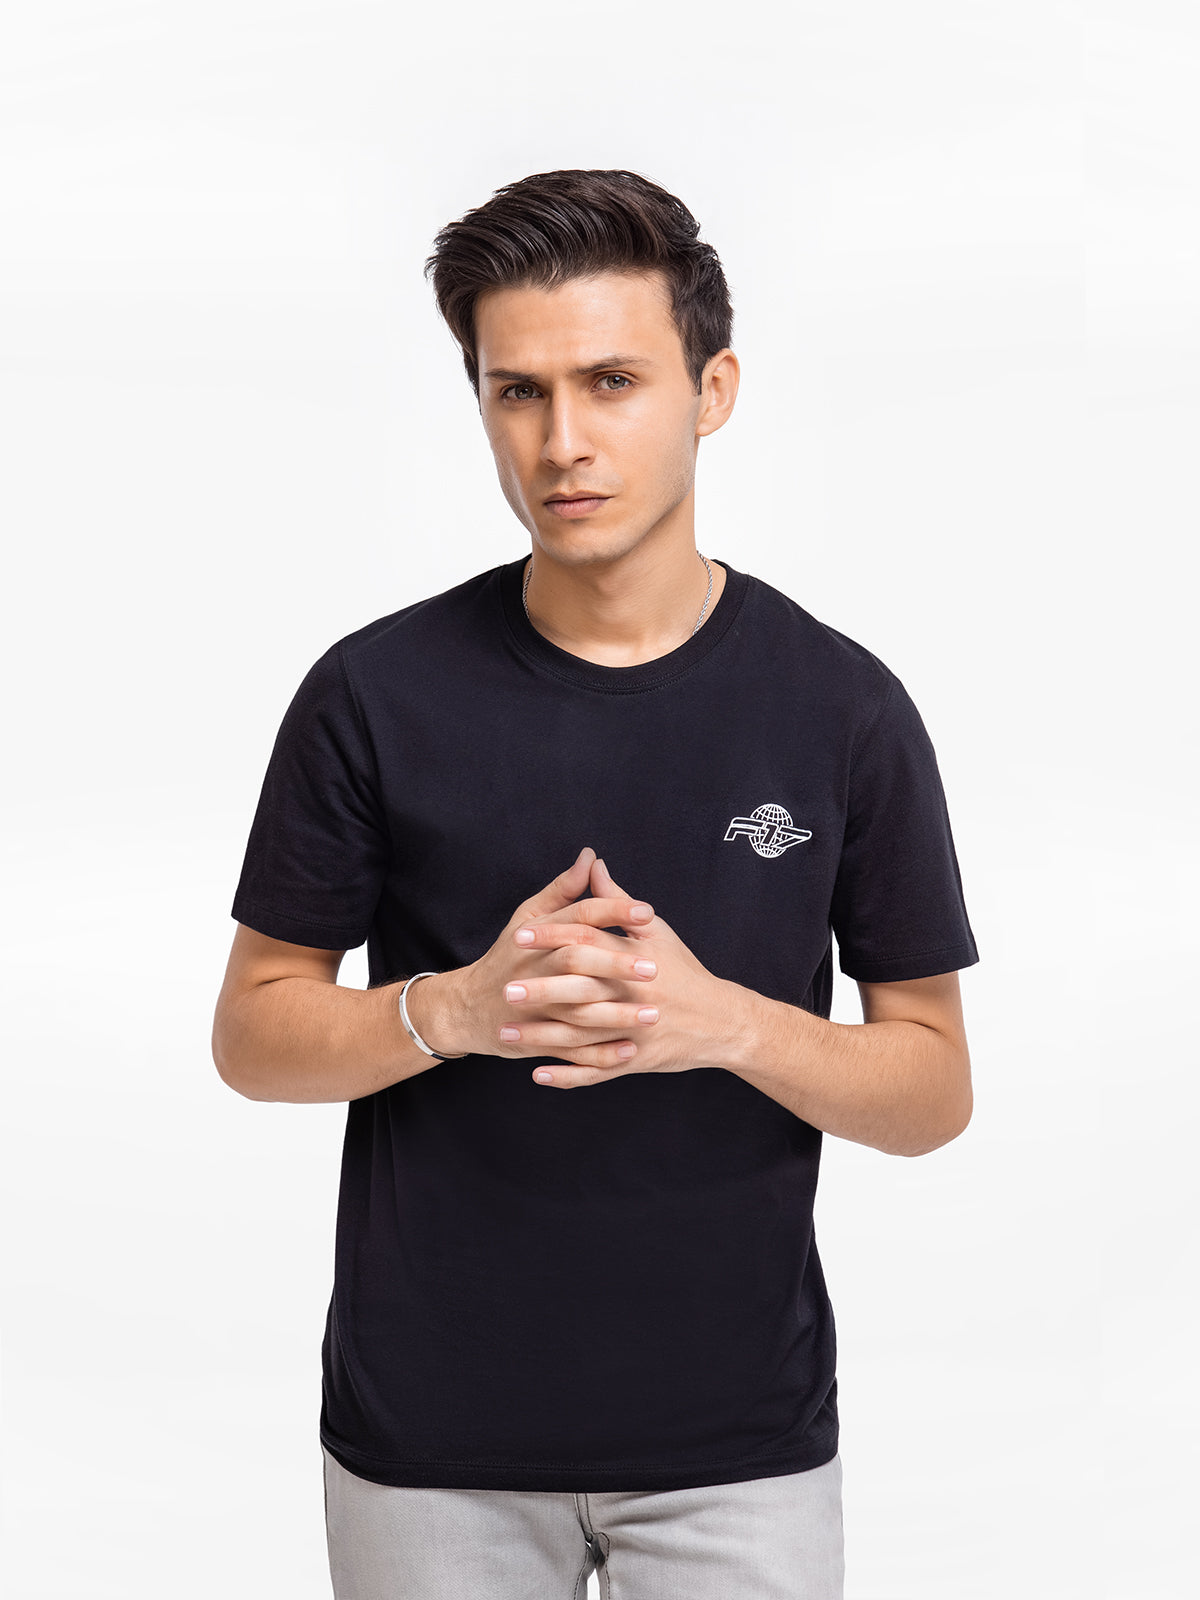 Stretch Fit Graphic Tee - FMTGT23-089